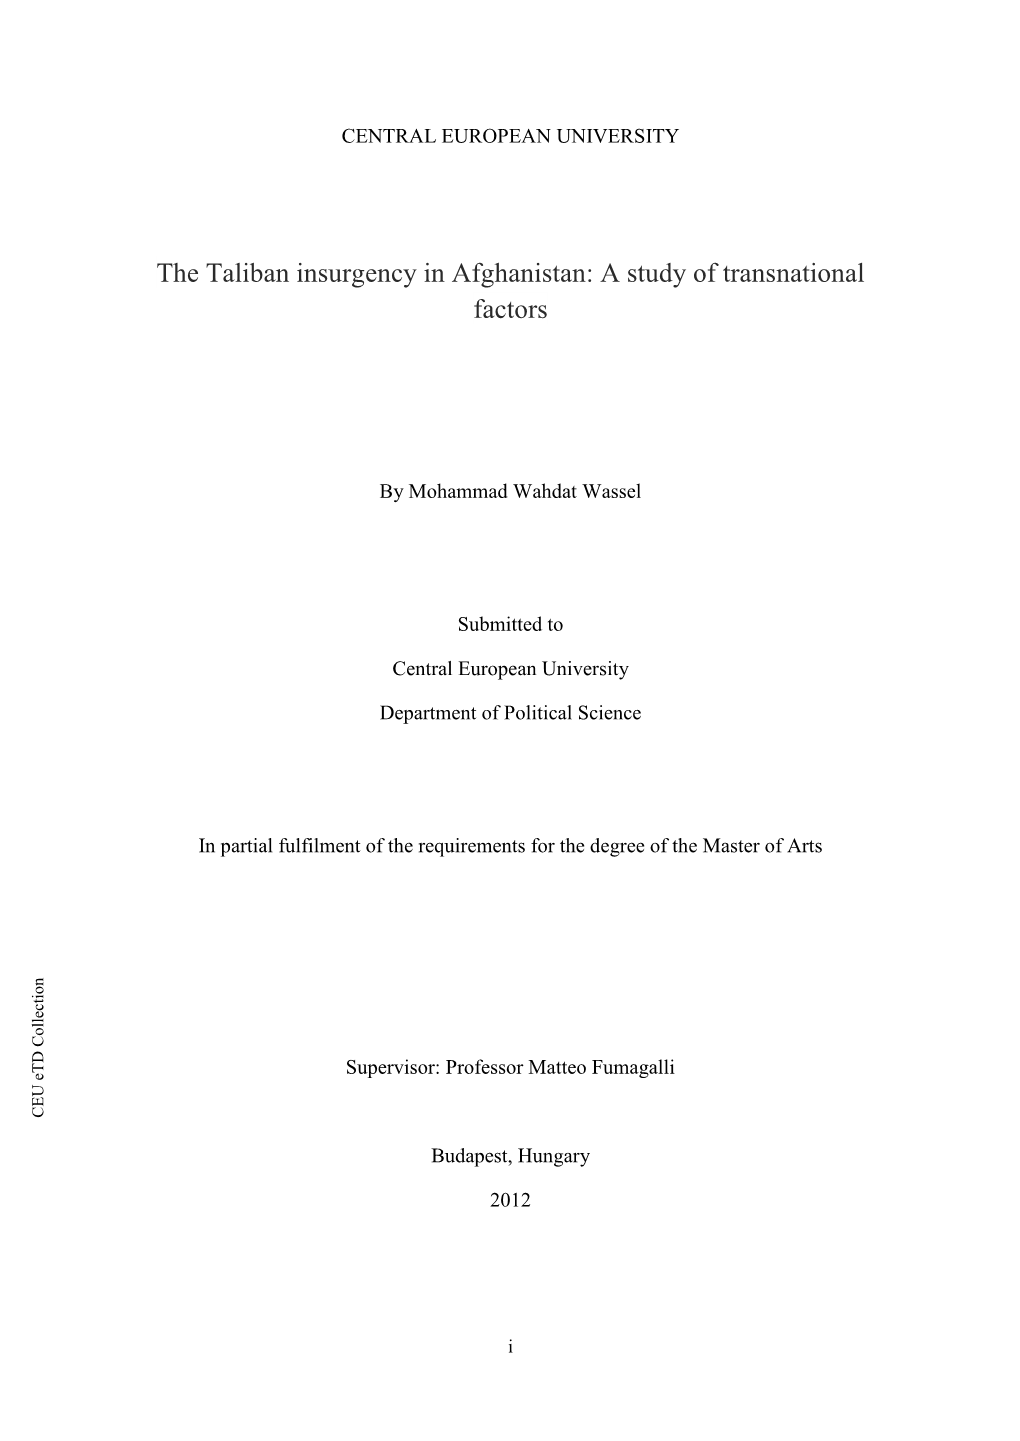 The Taliban Insurgency in Afghanistan